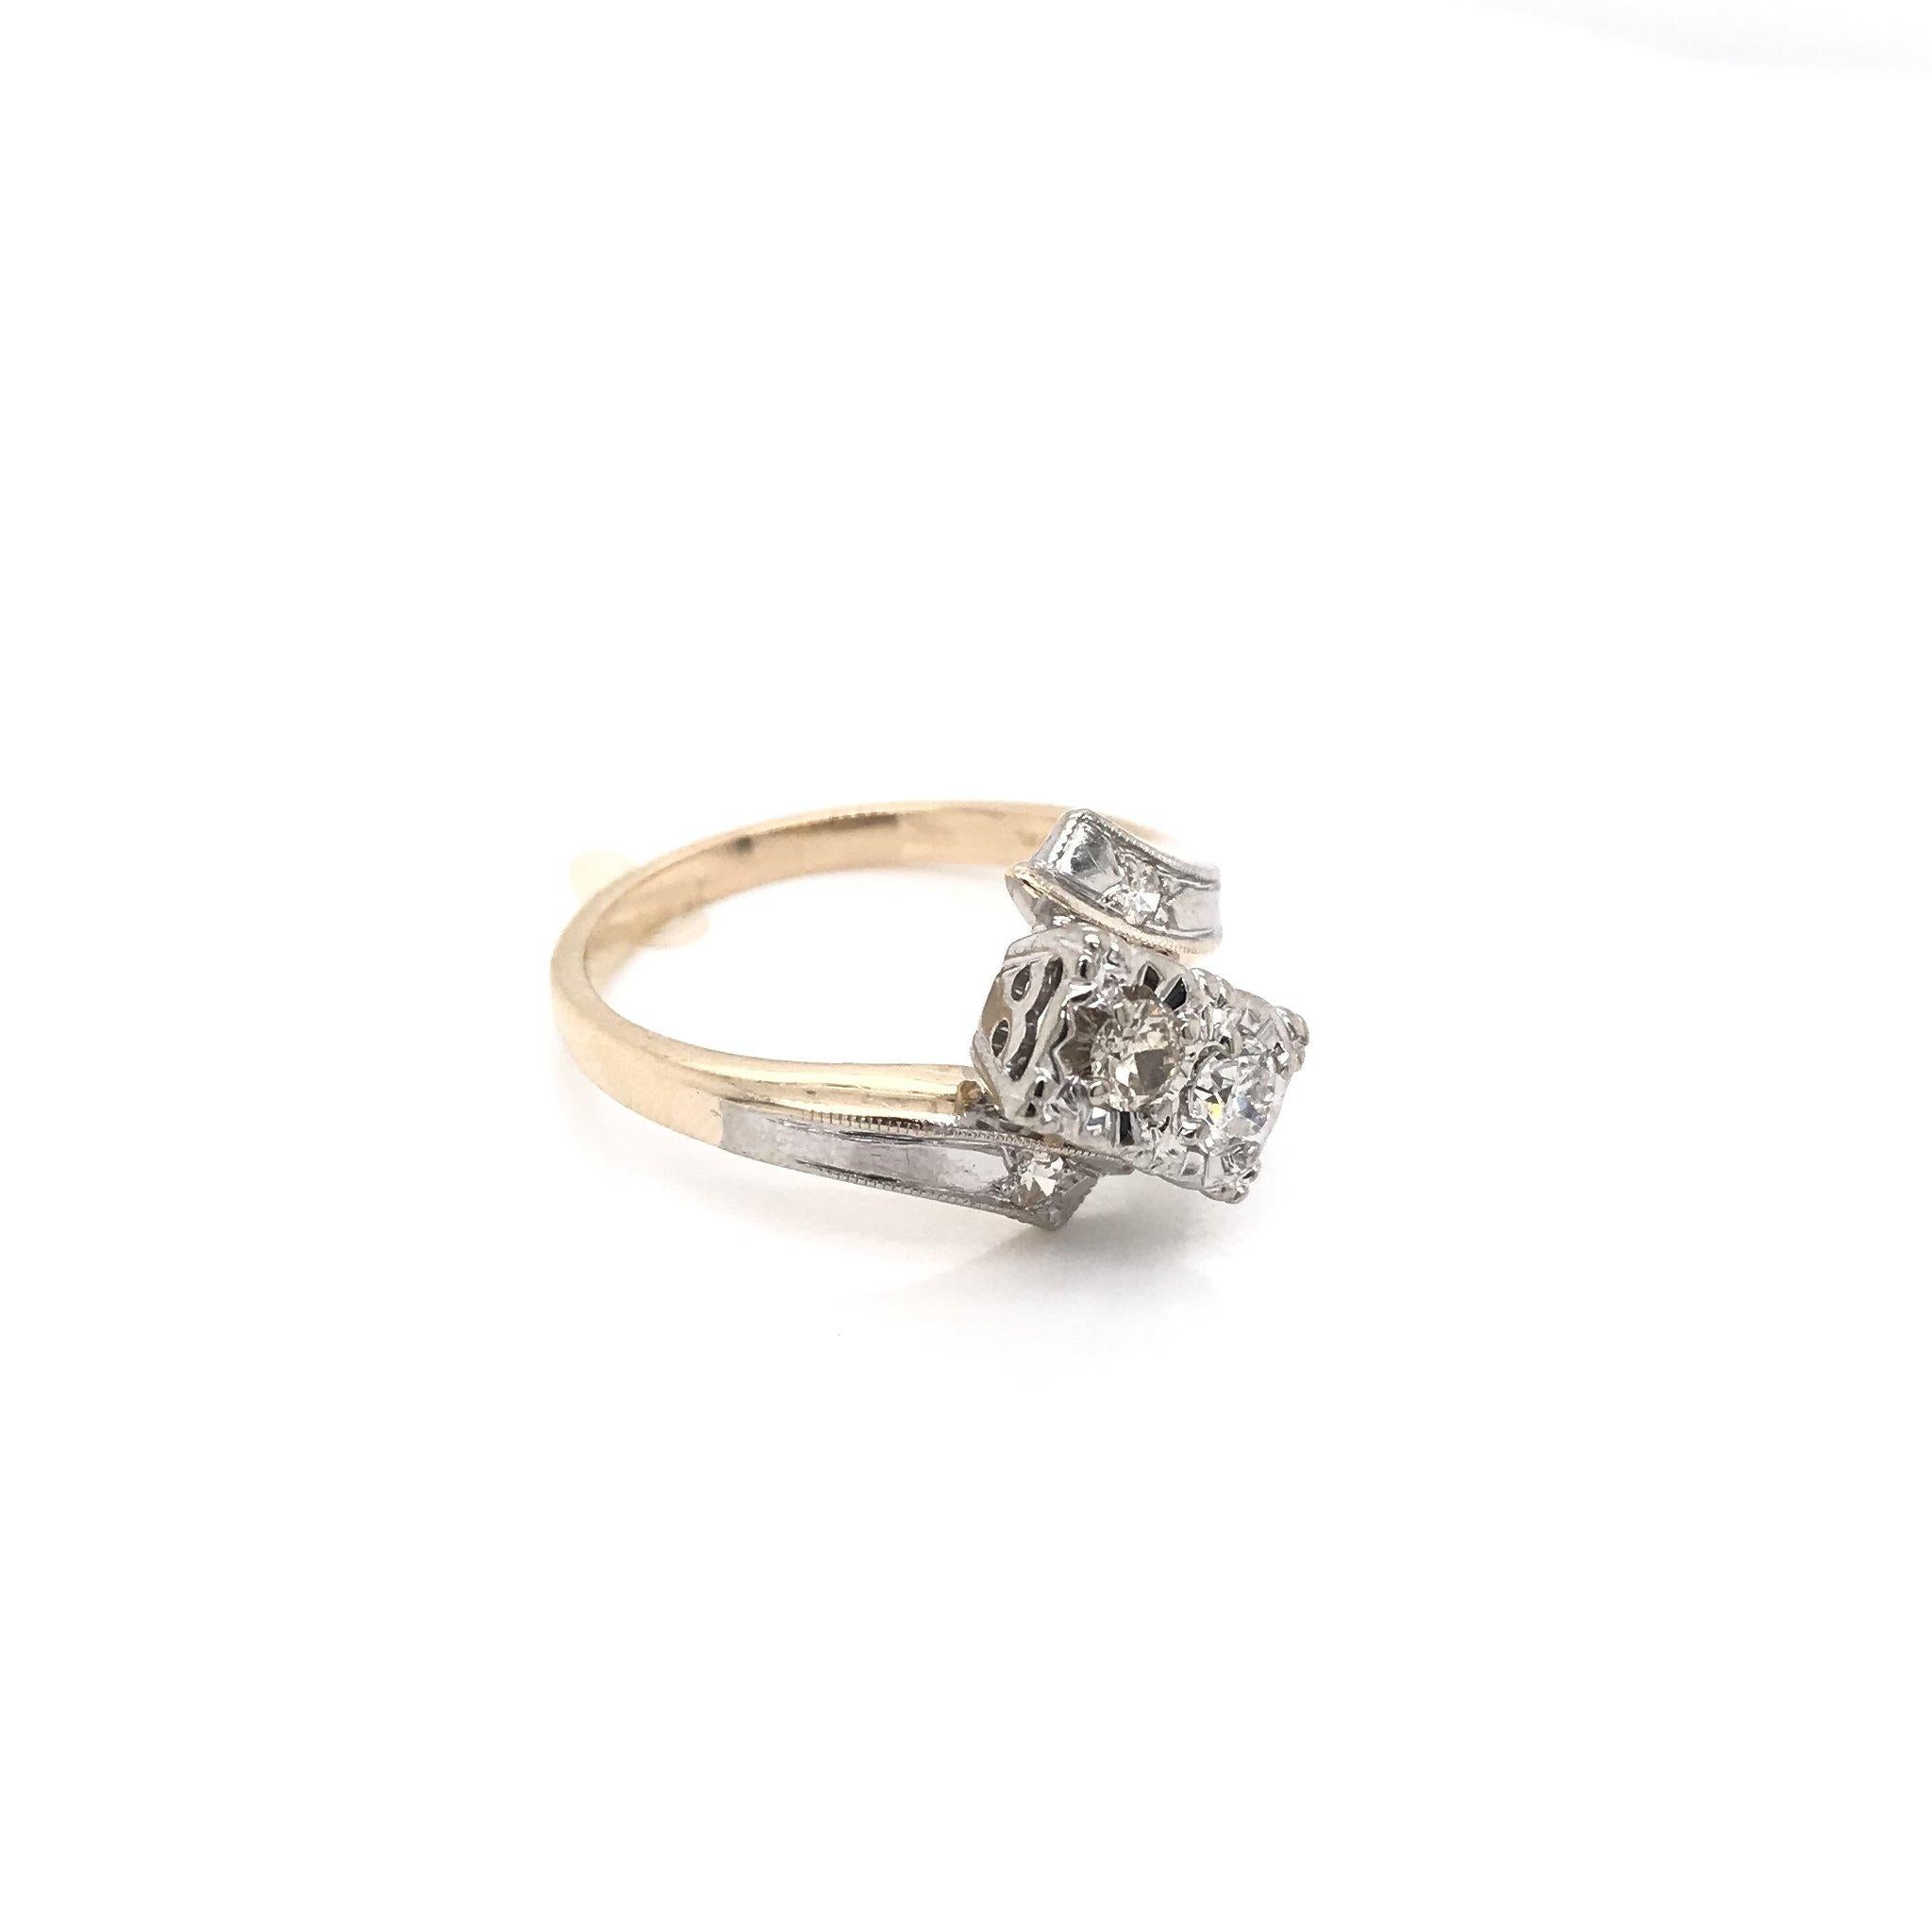 This piece was crafted sometime during the Mid Century design period ( 1940-1960 ). This ring features a lovely two toned 14k white gold and gold setting. The piece features two diamonds set in the classic 